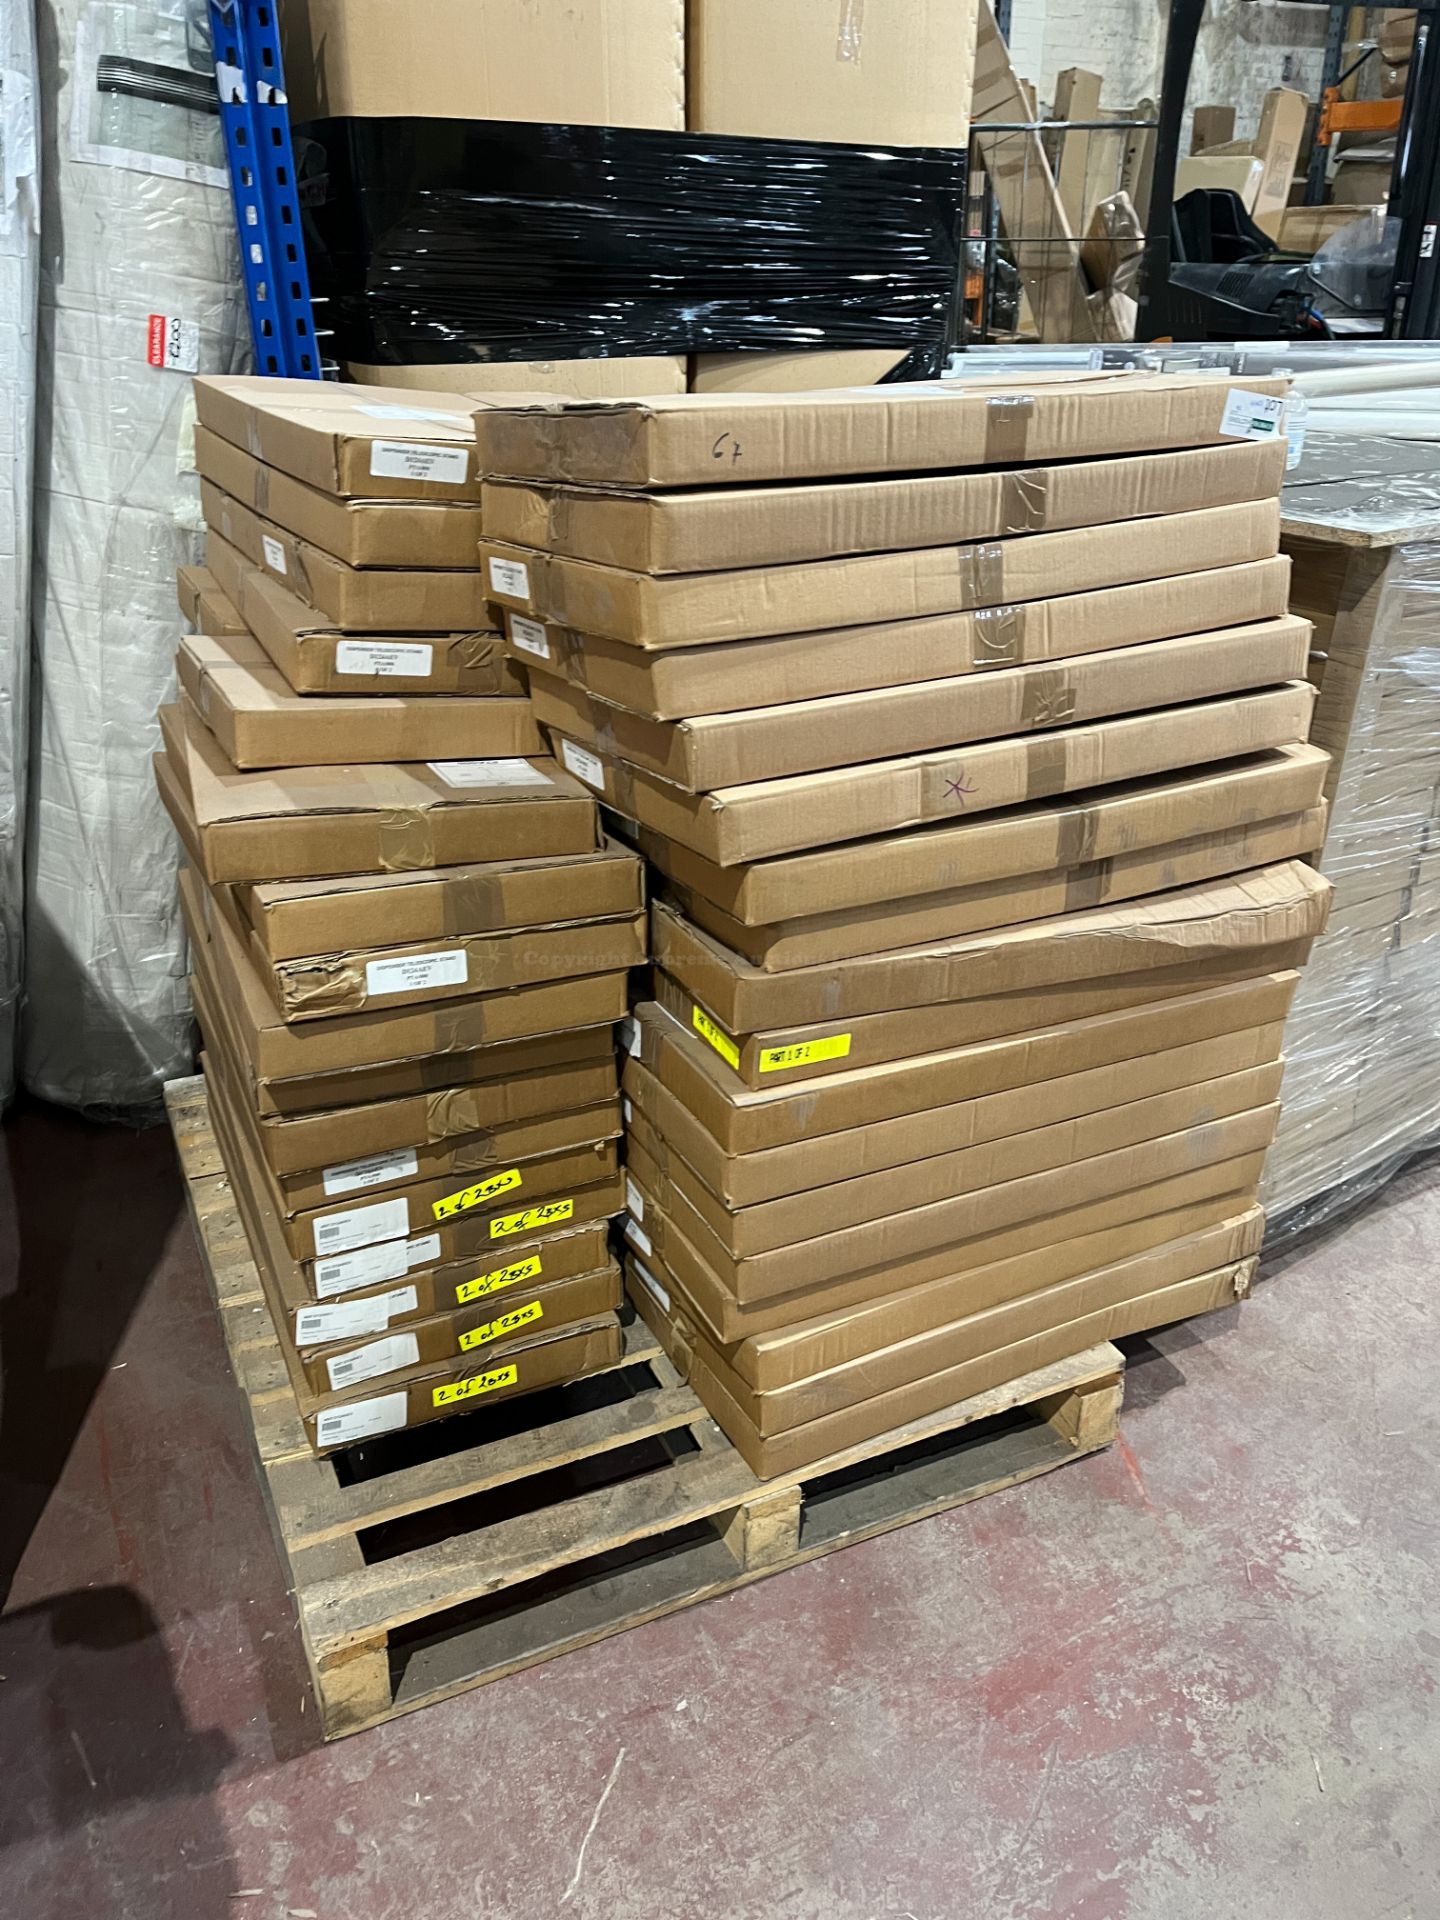 FULL PALLET TO CONATIN A LARGE QUANTITY OF DISPENSER TELESCOPIC STANDS R19